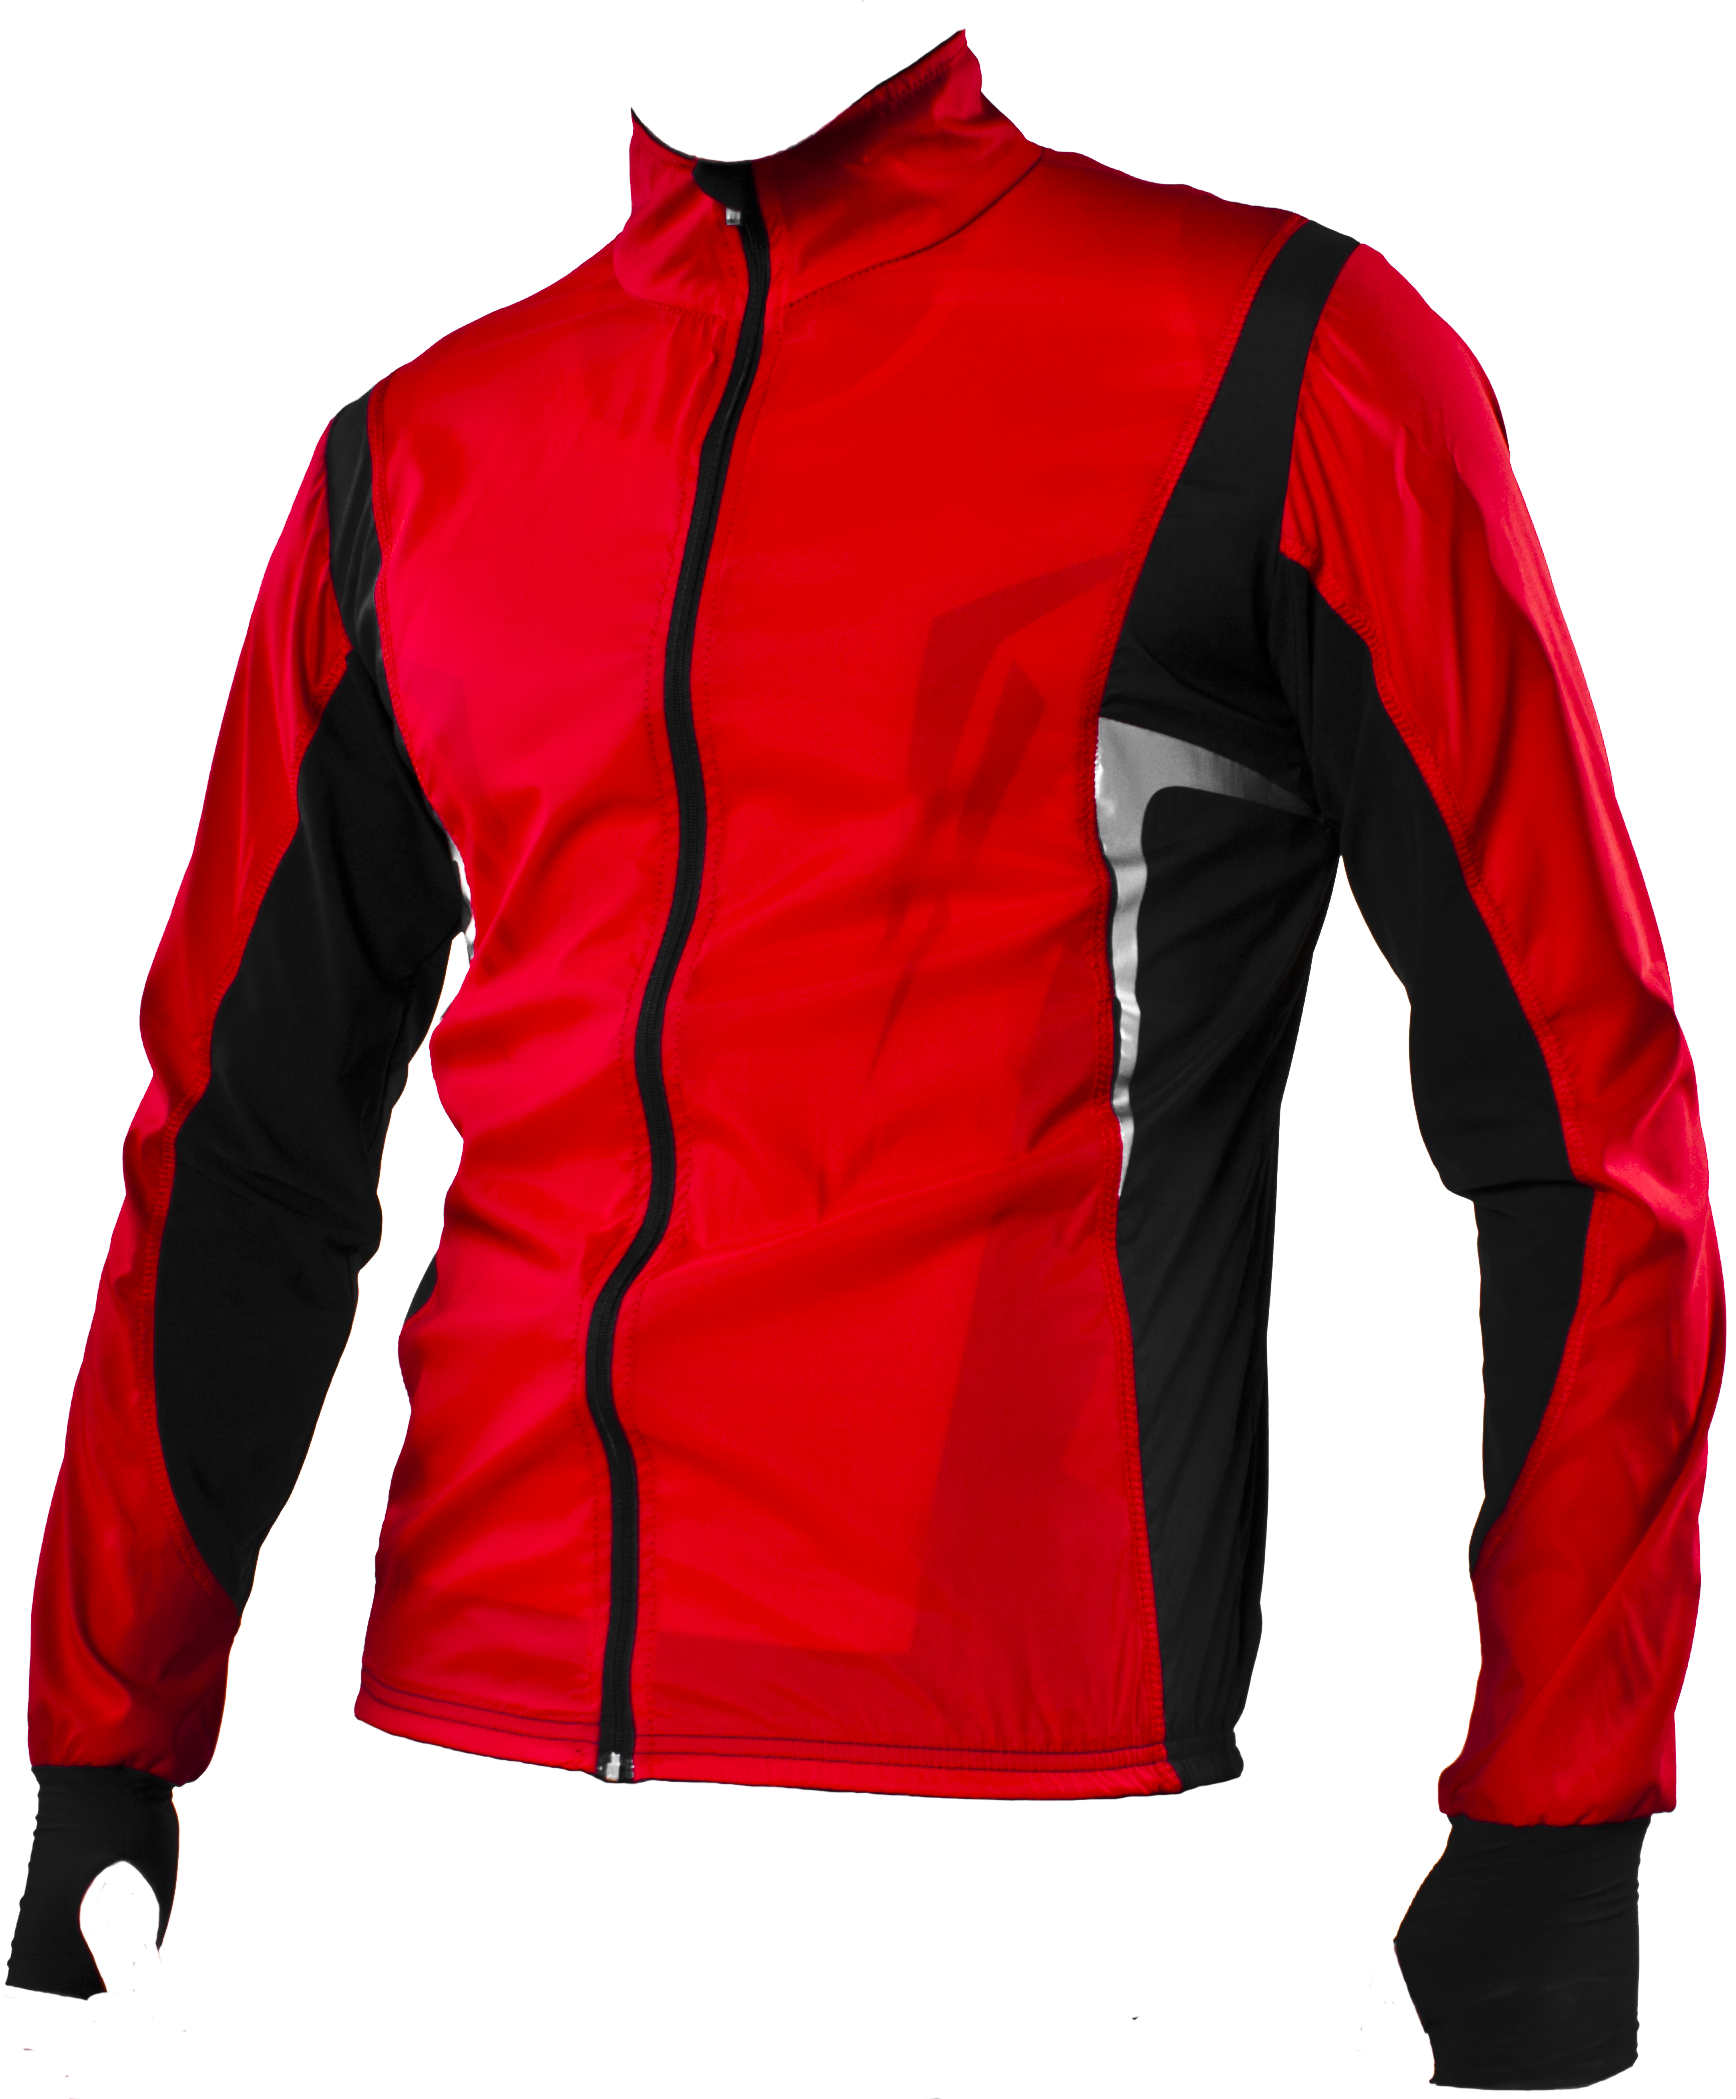 jacket png images are downloaded charge crazypngm crazy png images download 30522